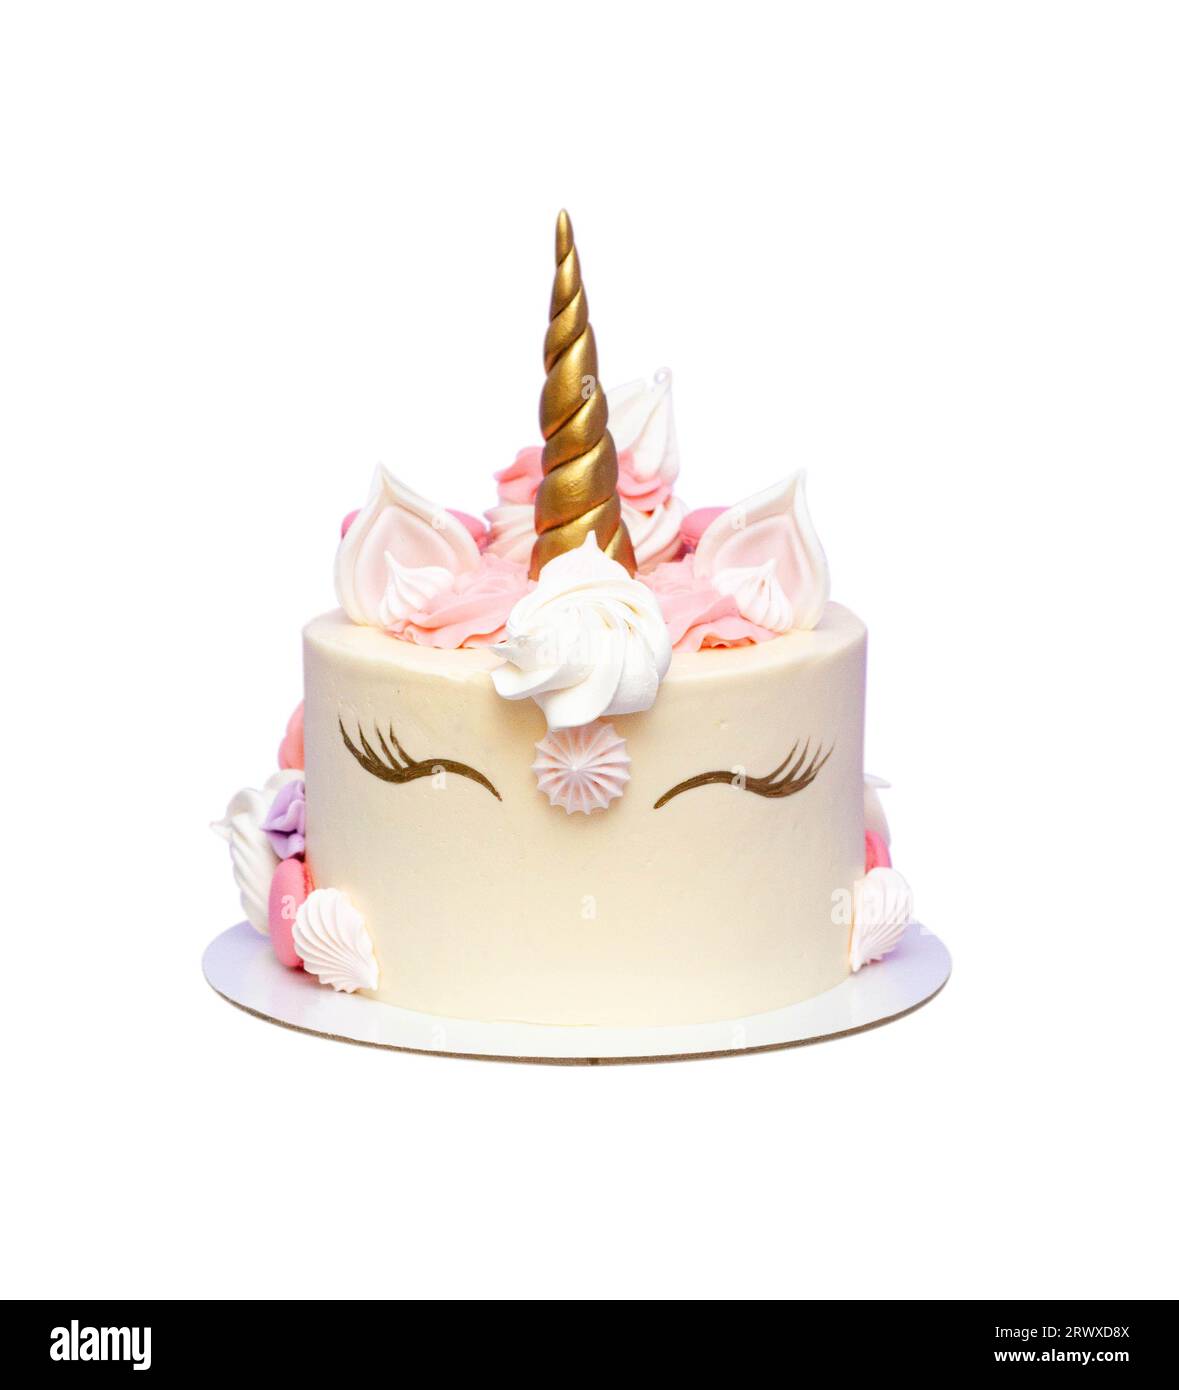 Cute unicorn cake with golden painted closed eyes, meringue ...